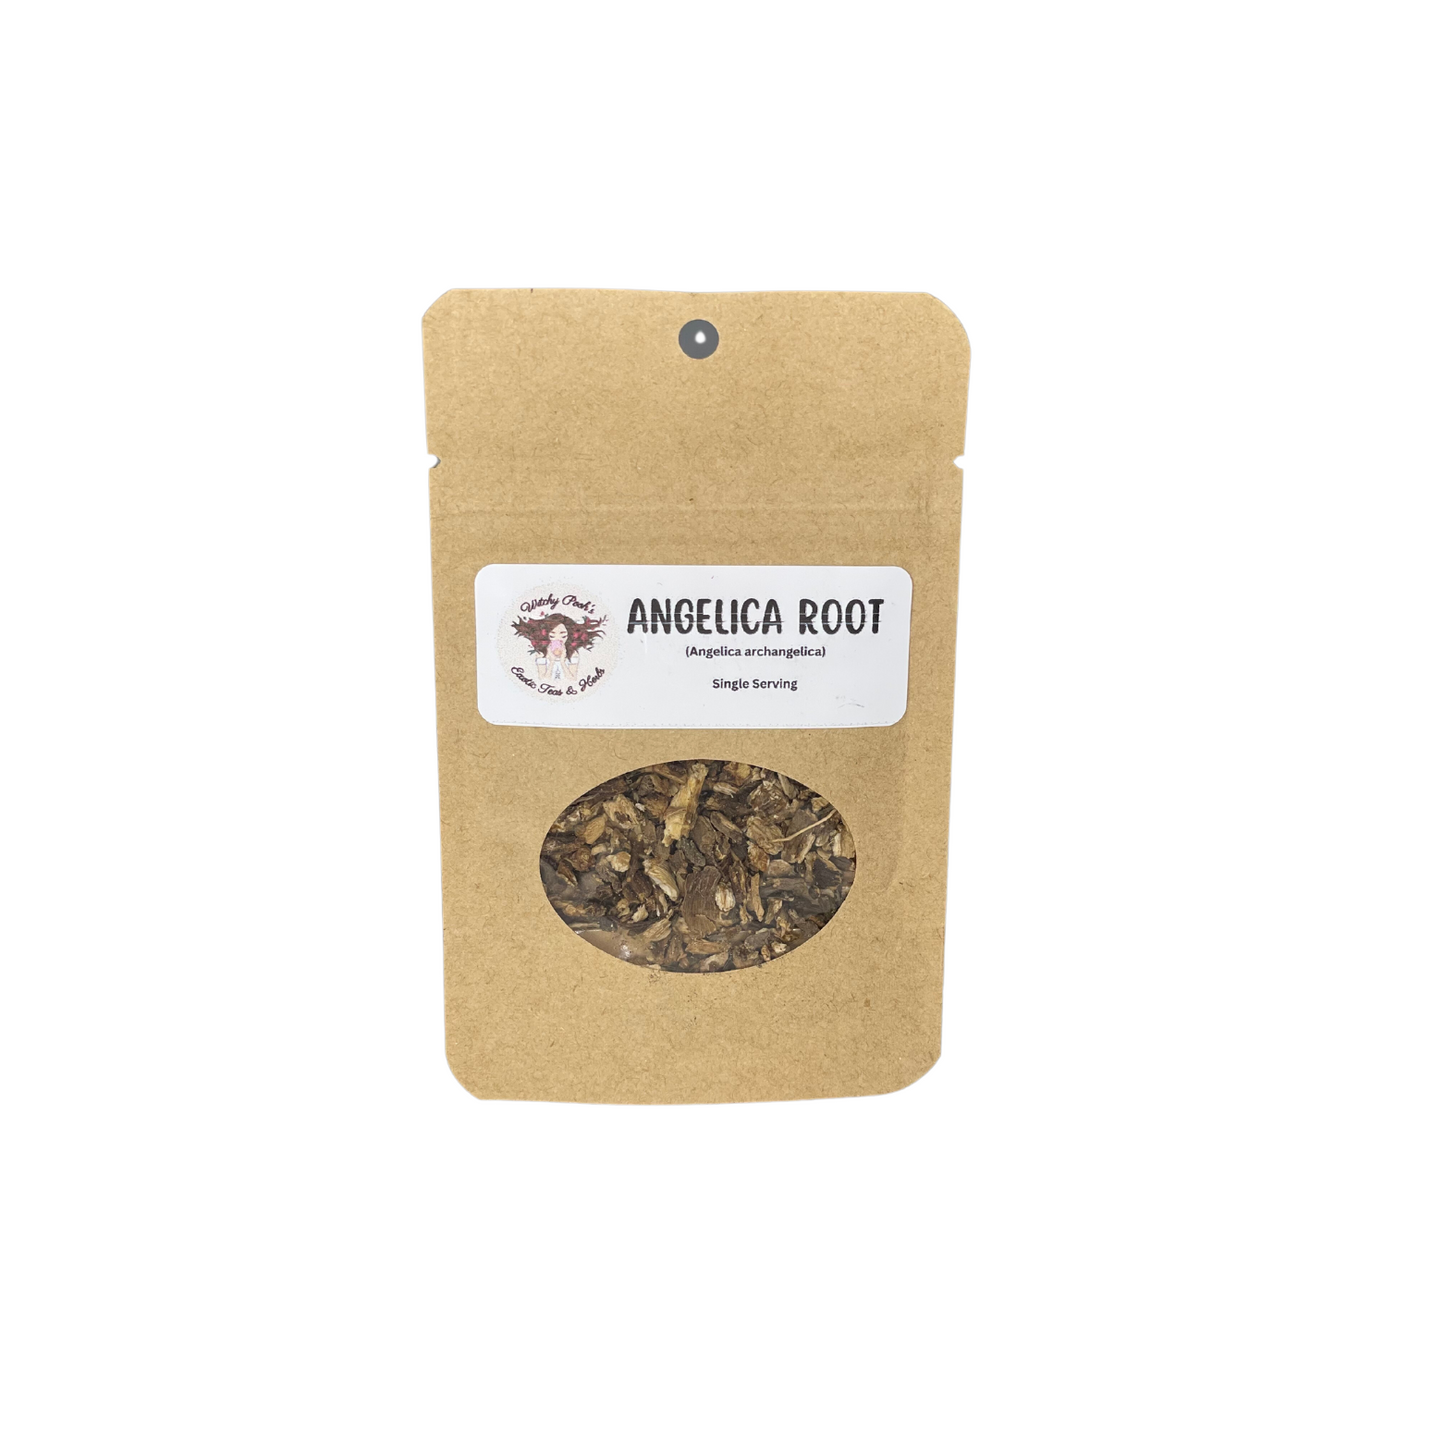 Angelica Root, Pieces of Root, Dried Herbs, Food Grade Herbs, Herbs and Spices, Loose Leaf Herbs